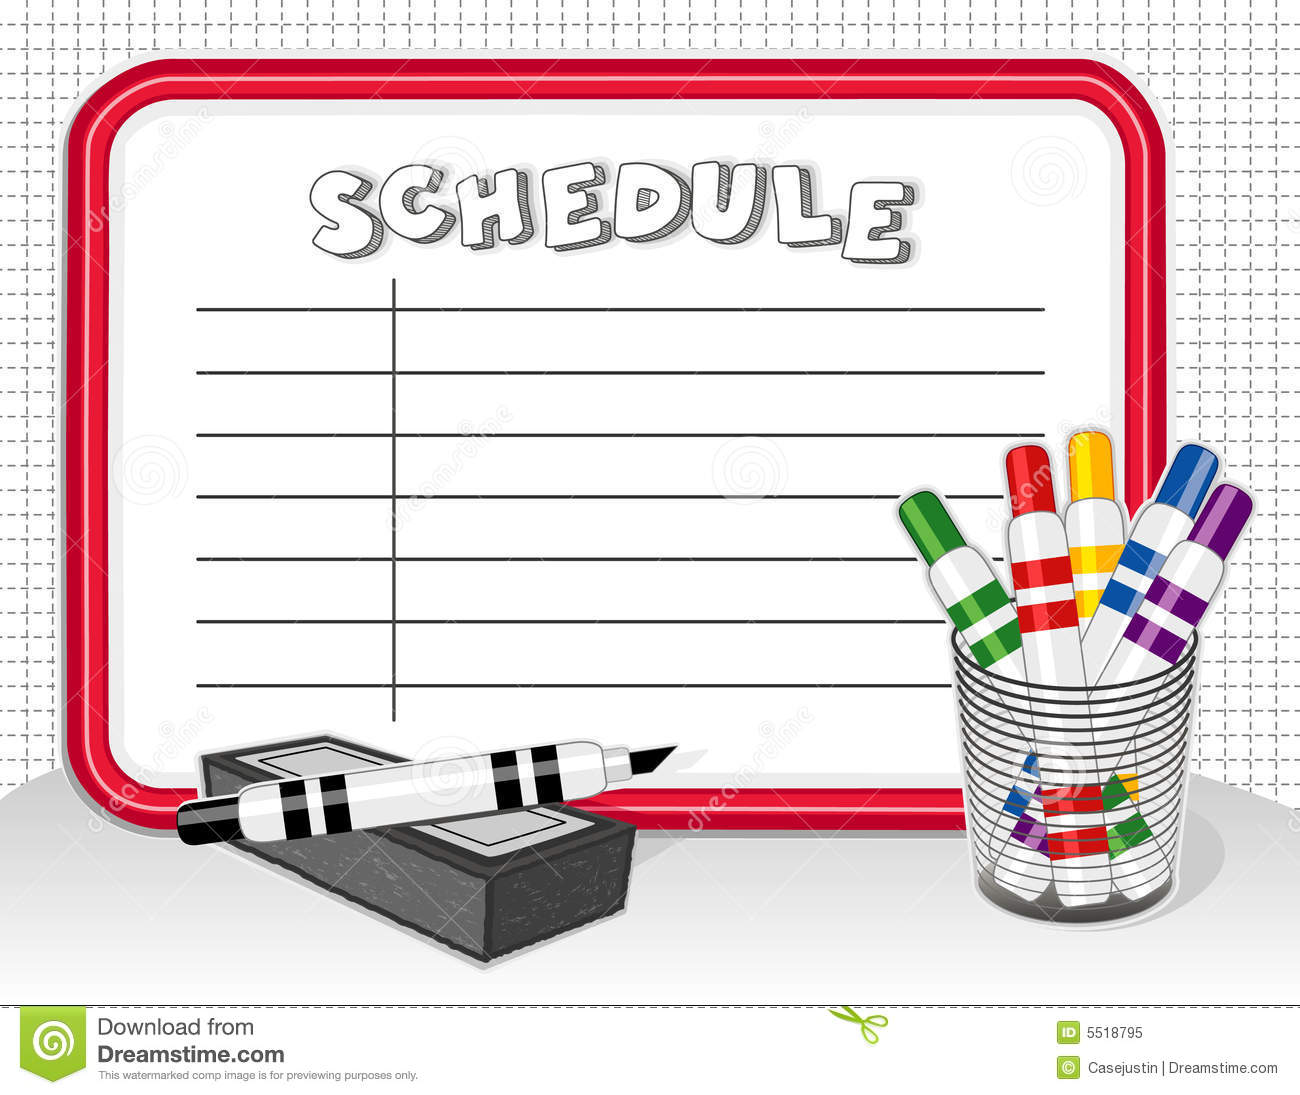 Schedule Rules Behavior And Policies   Tippin Elementary